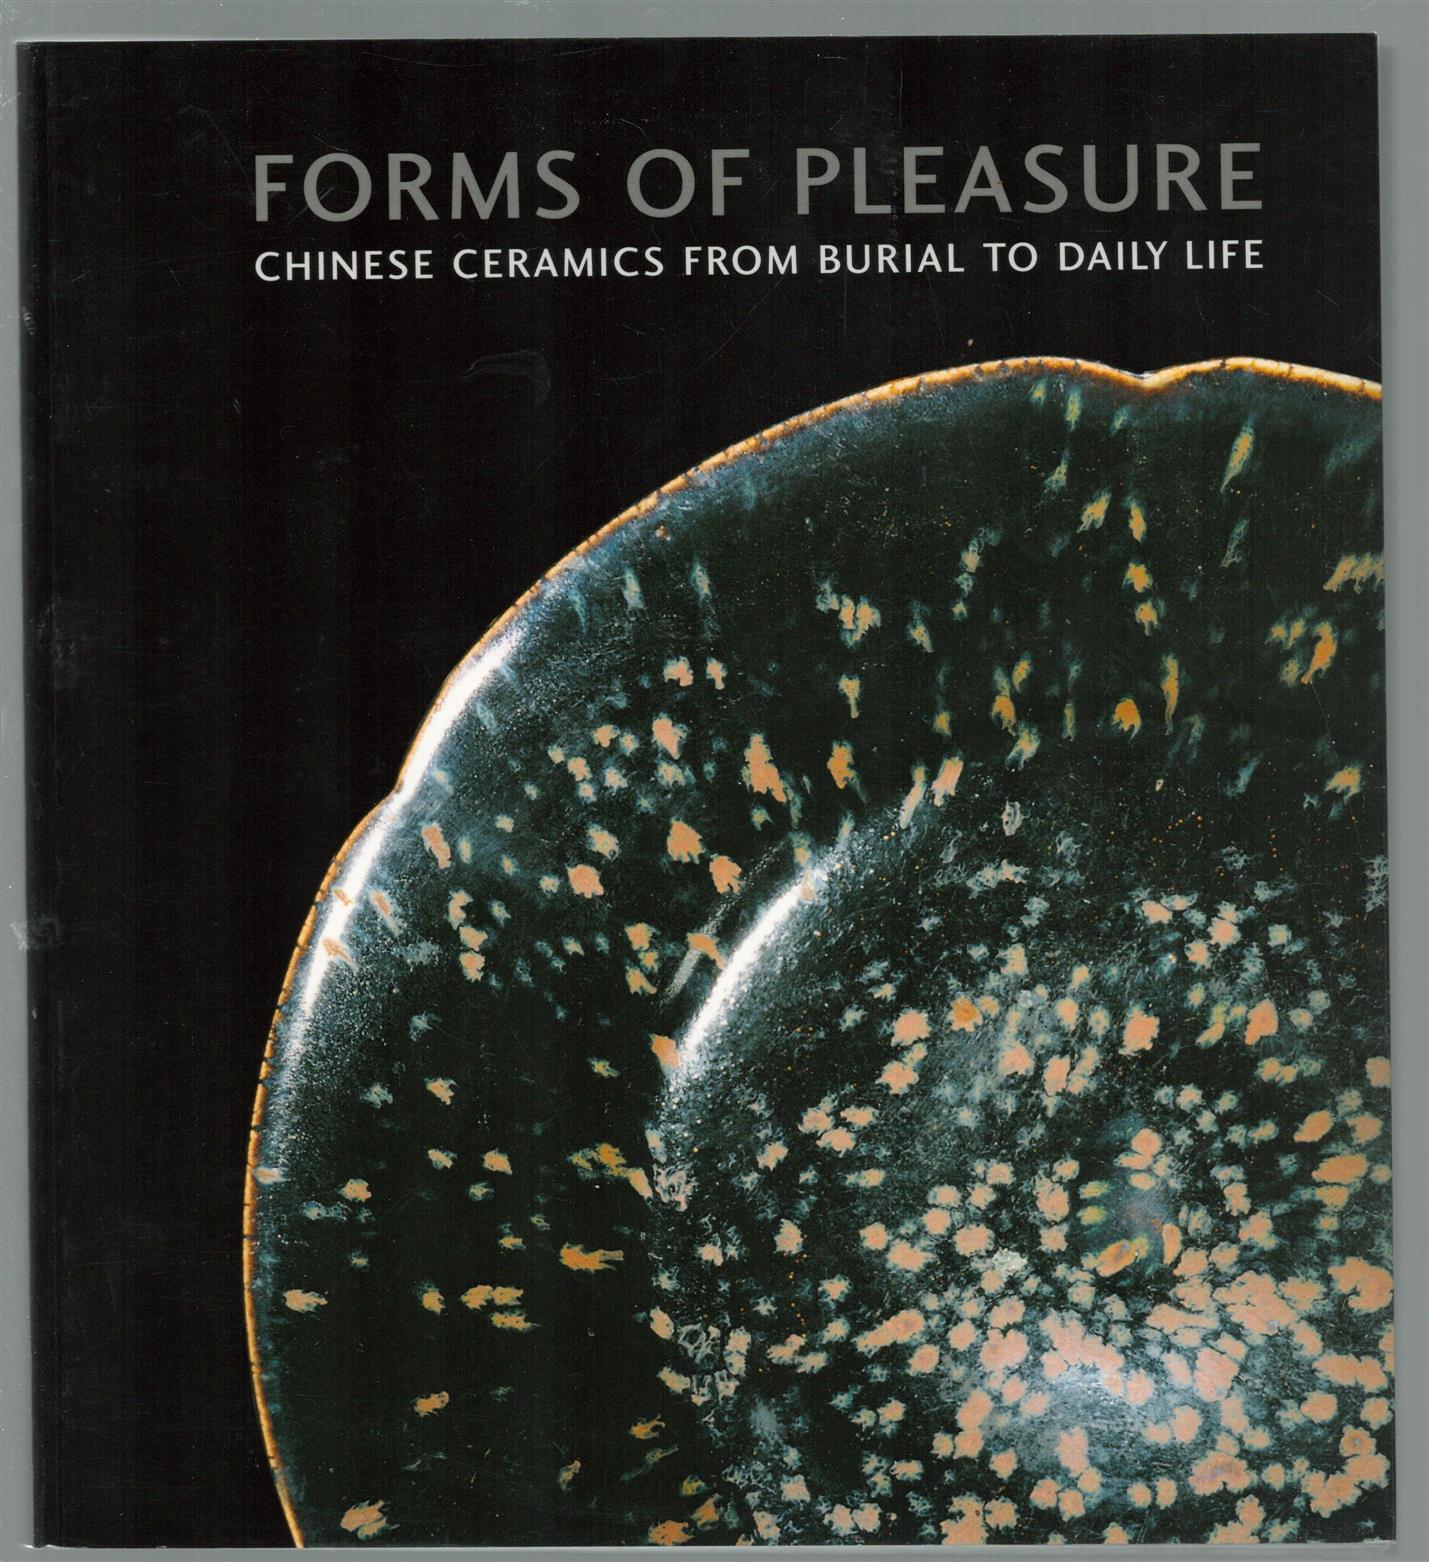 Francisco Capelo - Forms of pleasure: Chinese ceramics from burial to daily life